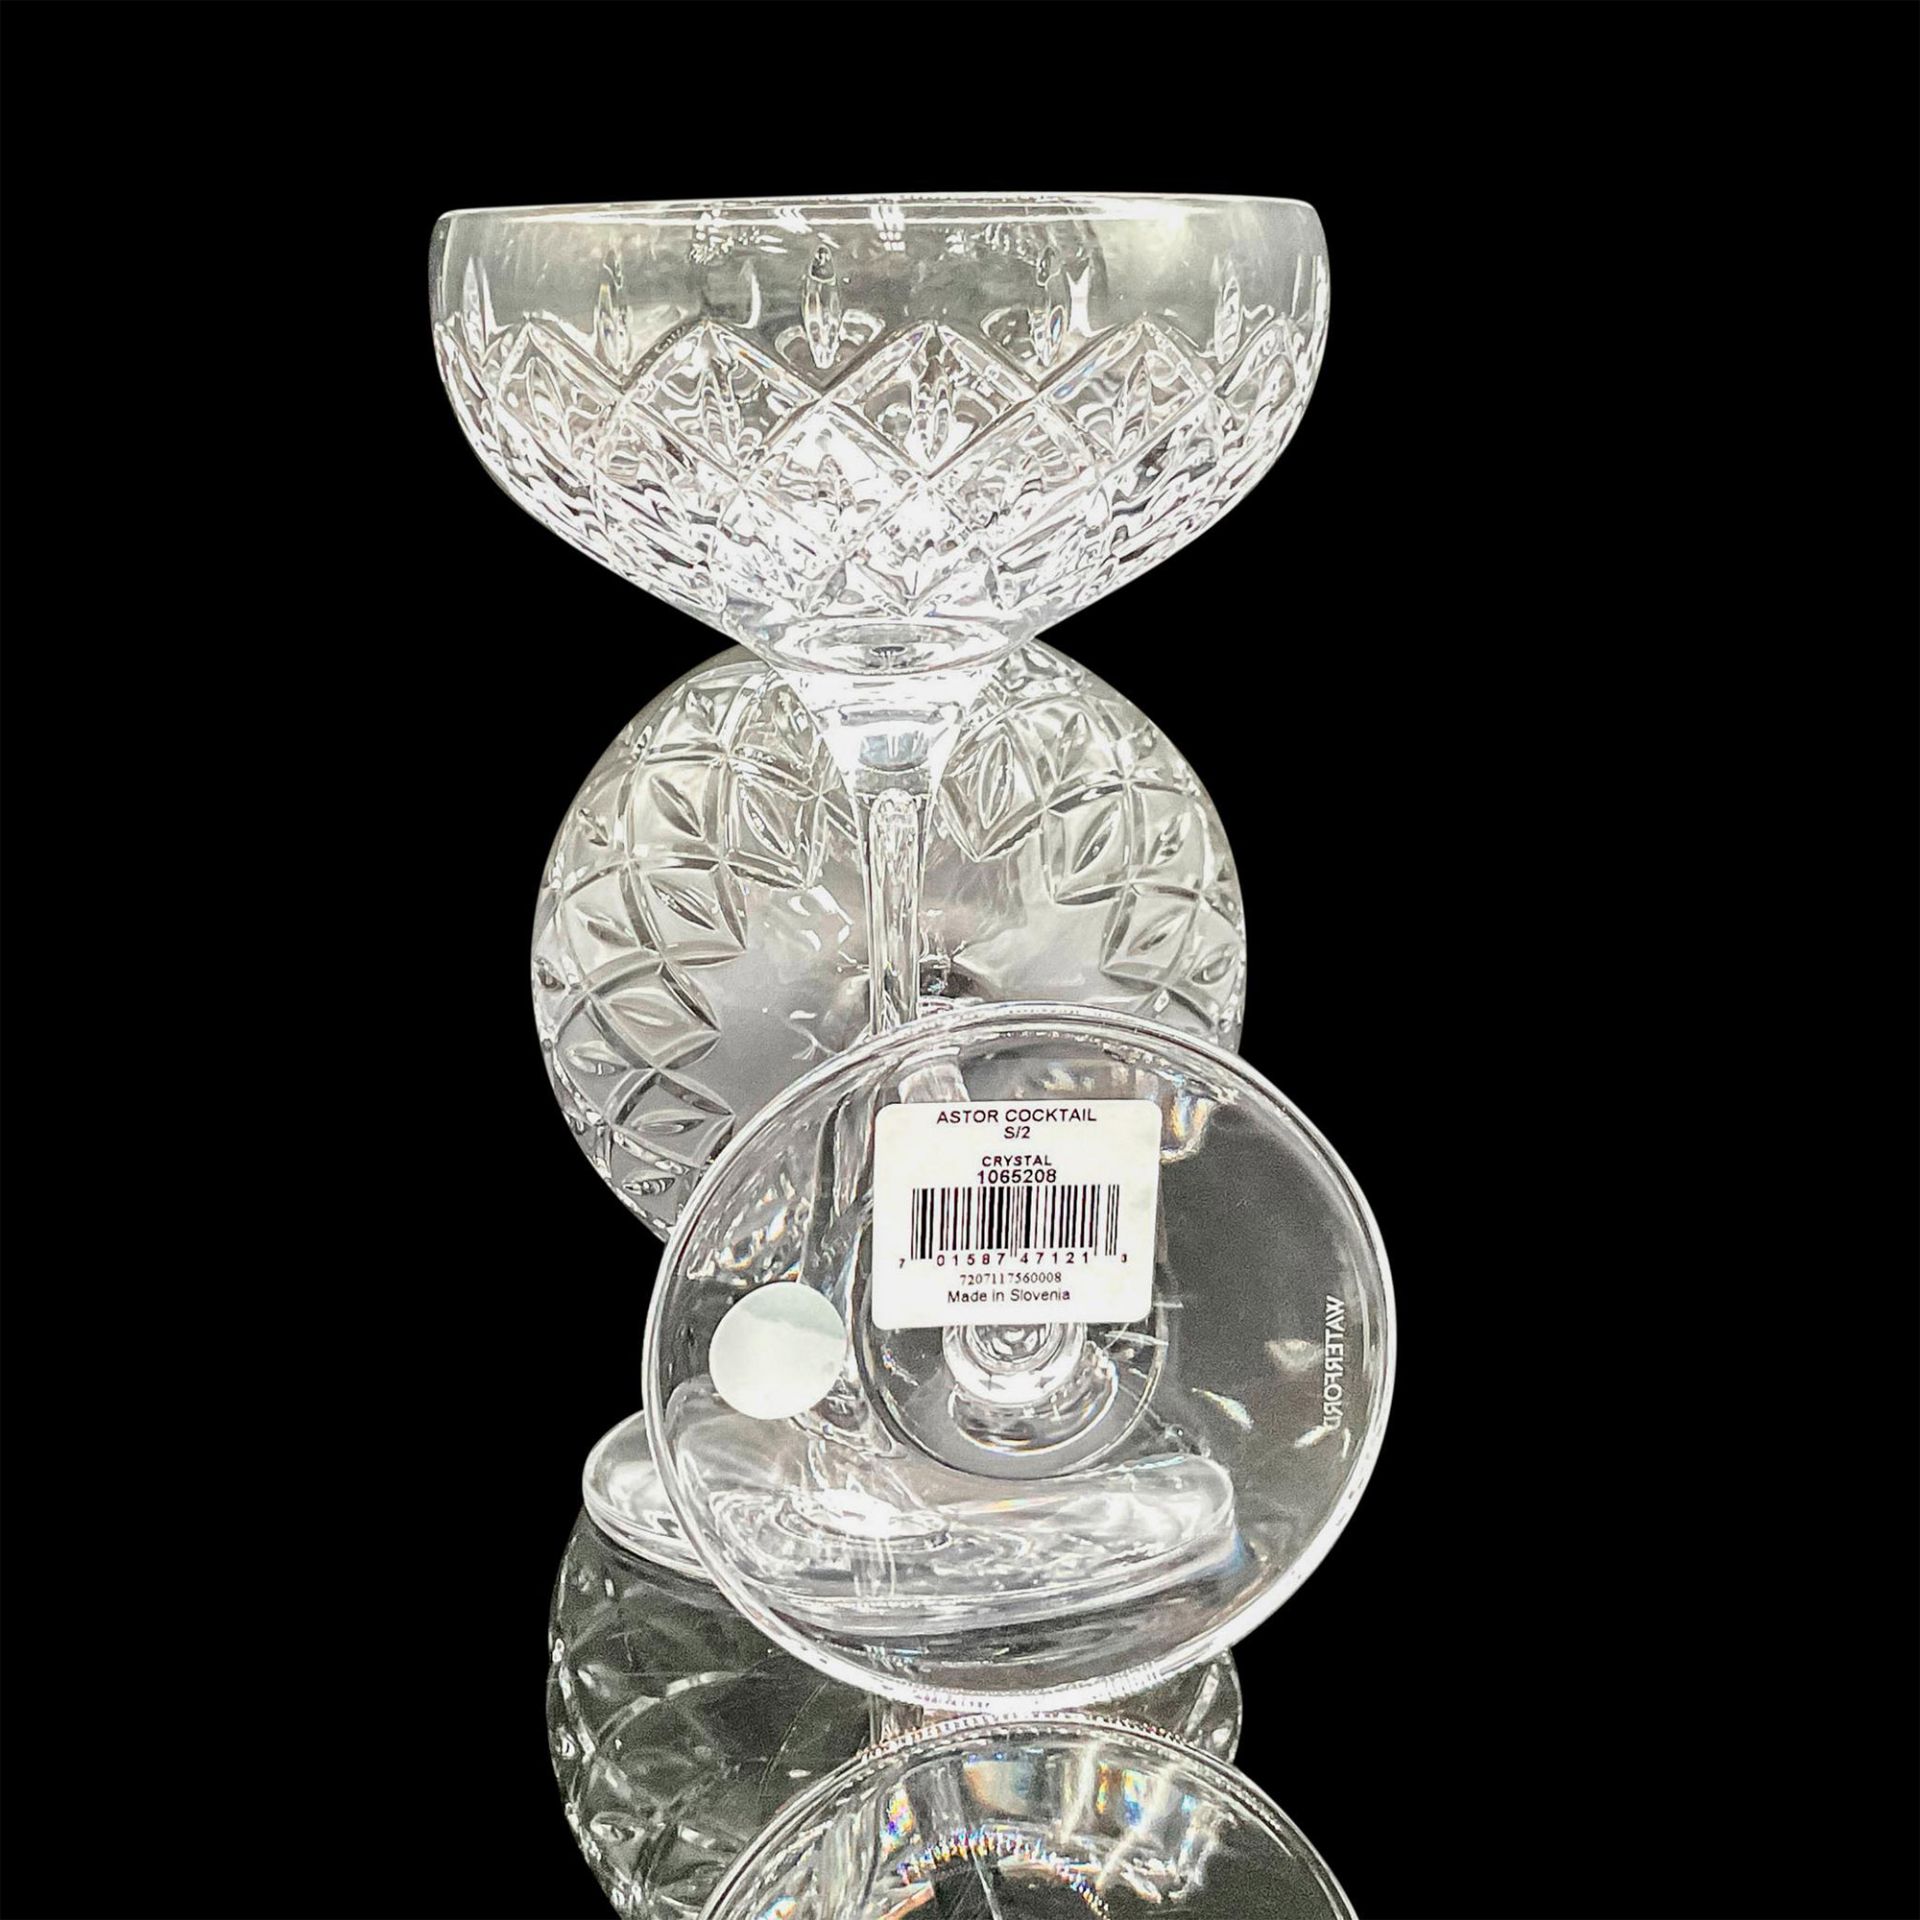 Waterford Crystal Cocktail Glasses, Astor - Image 3 of 4